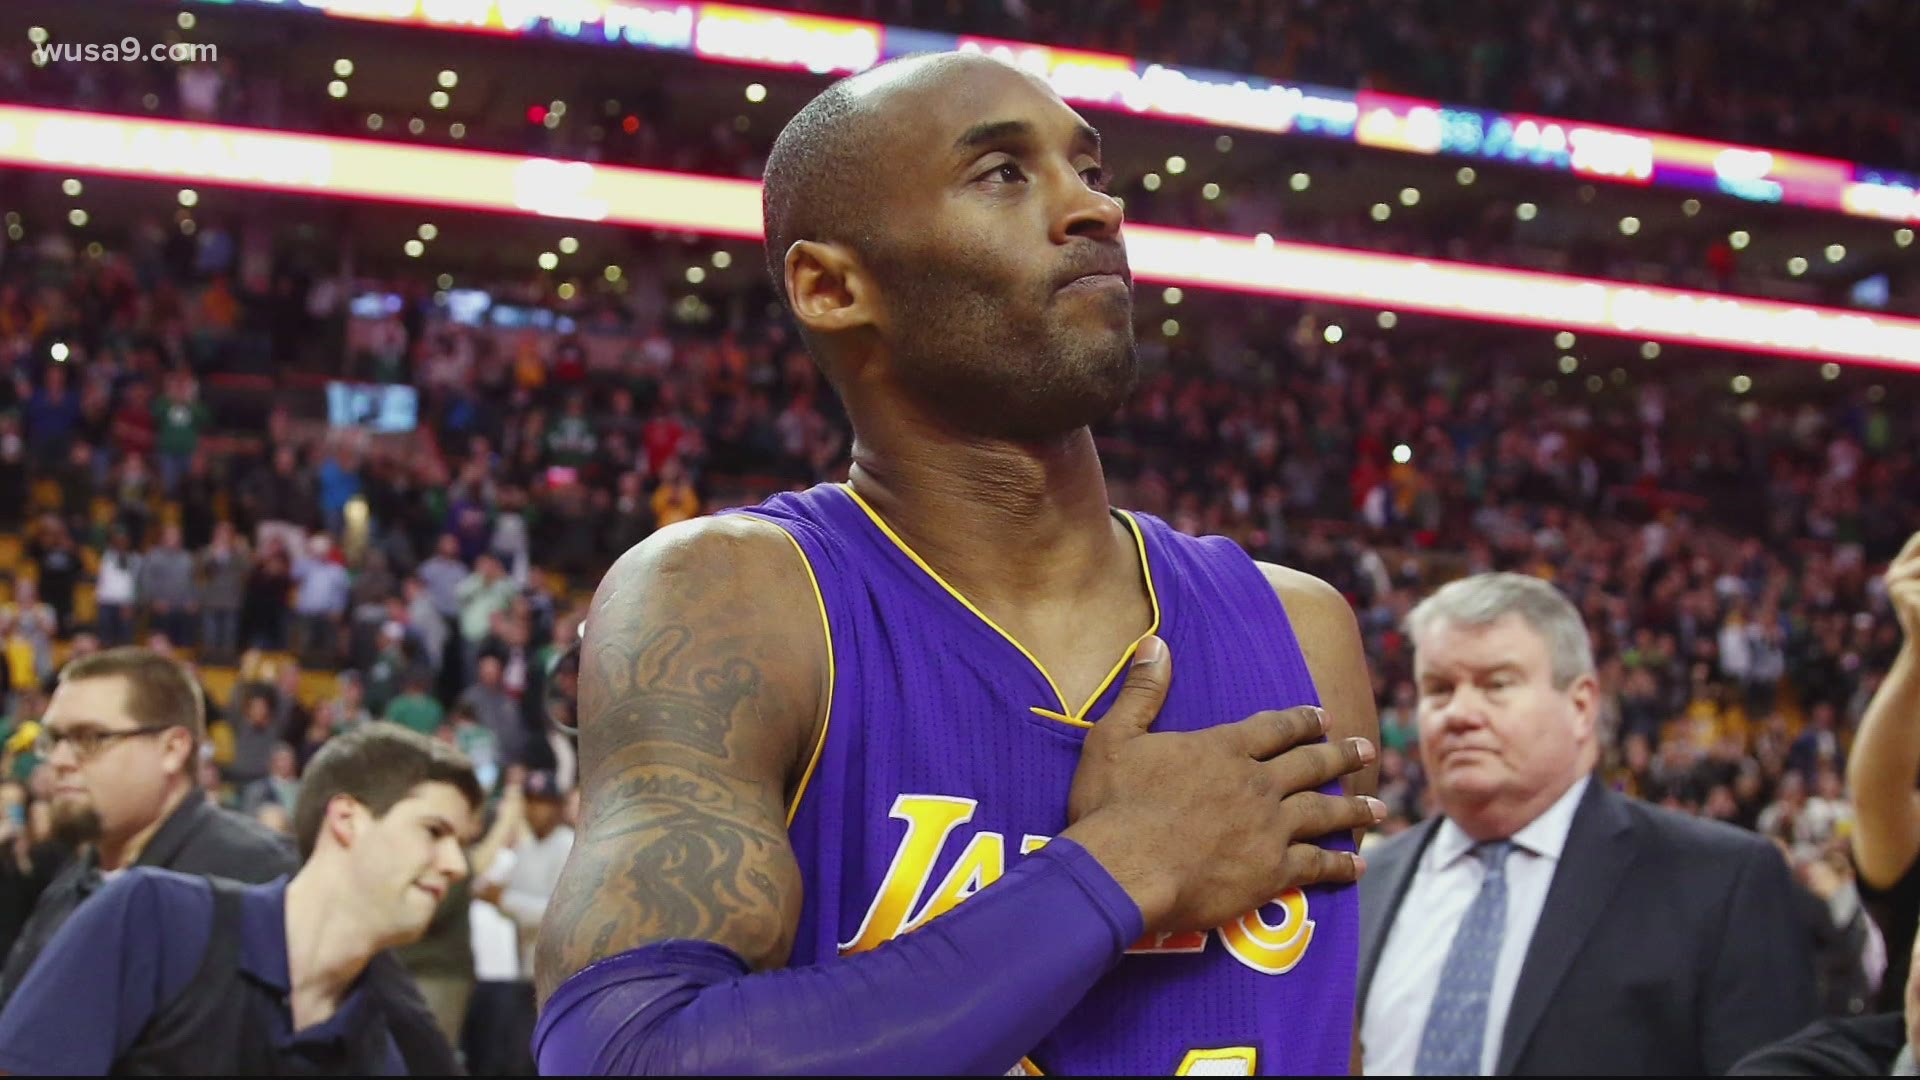 Reese reflects on the impact Kobe Bryant had on his life, one year after his passing